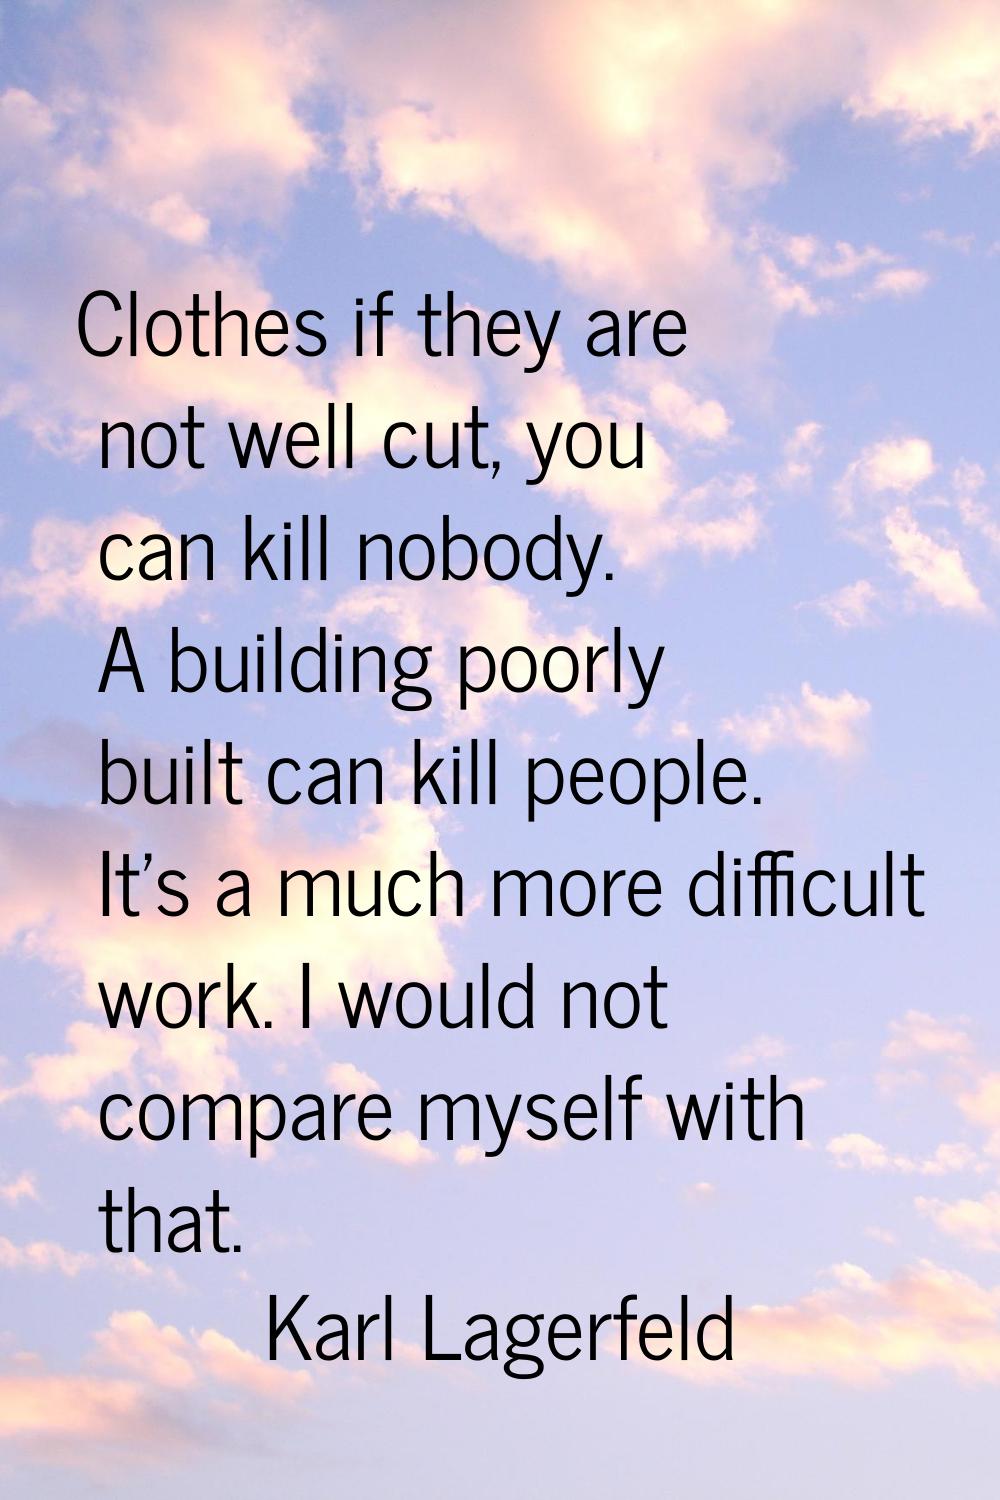 Clothes if they are not well cut, you can kill nobody. A building poorly built can kill people. It'